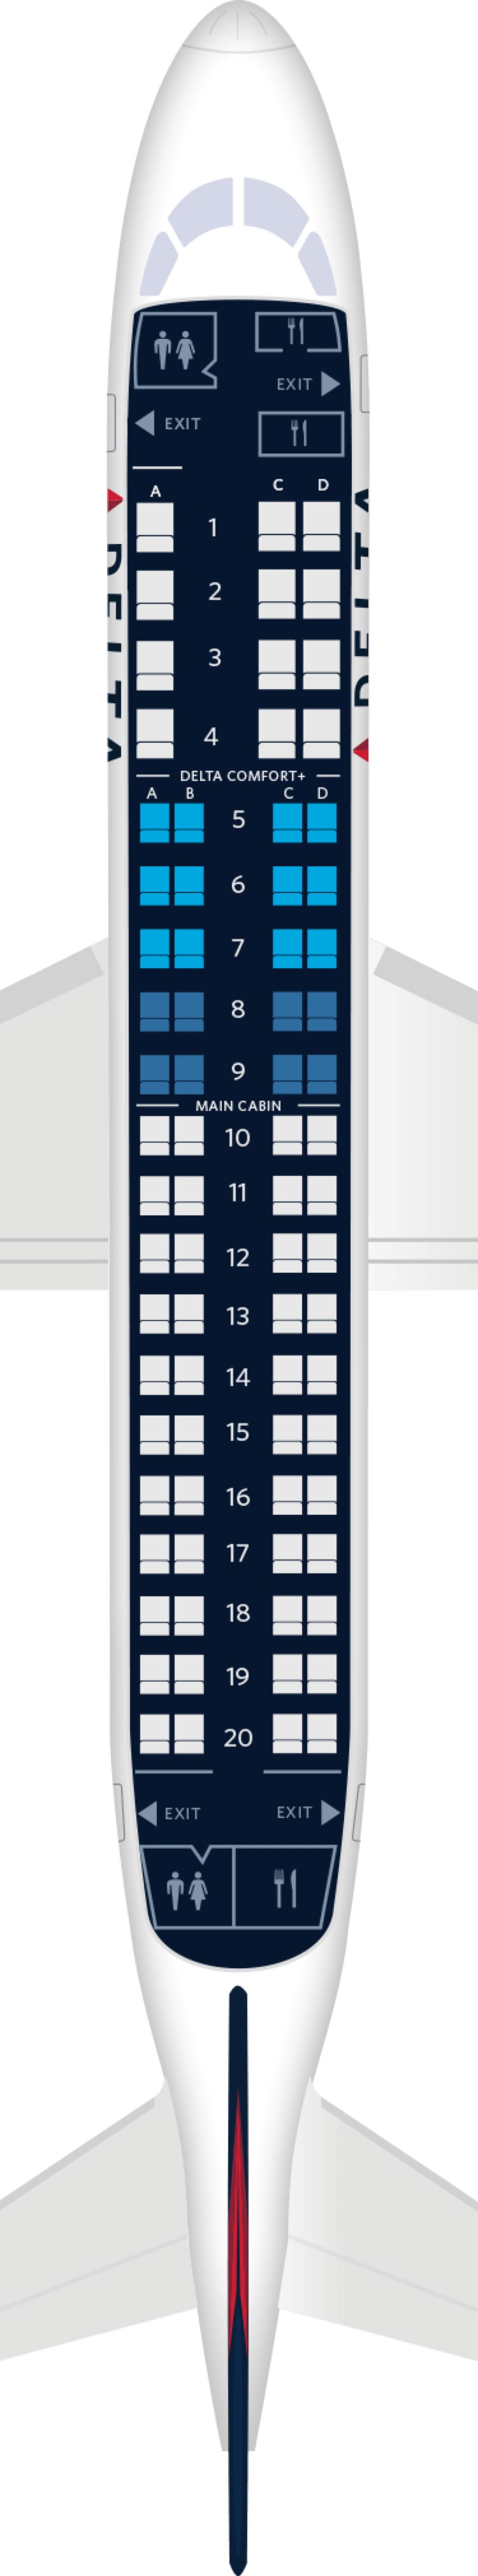 Embraer 175 Delta Under Seat Dimensions | Review Home Decor